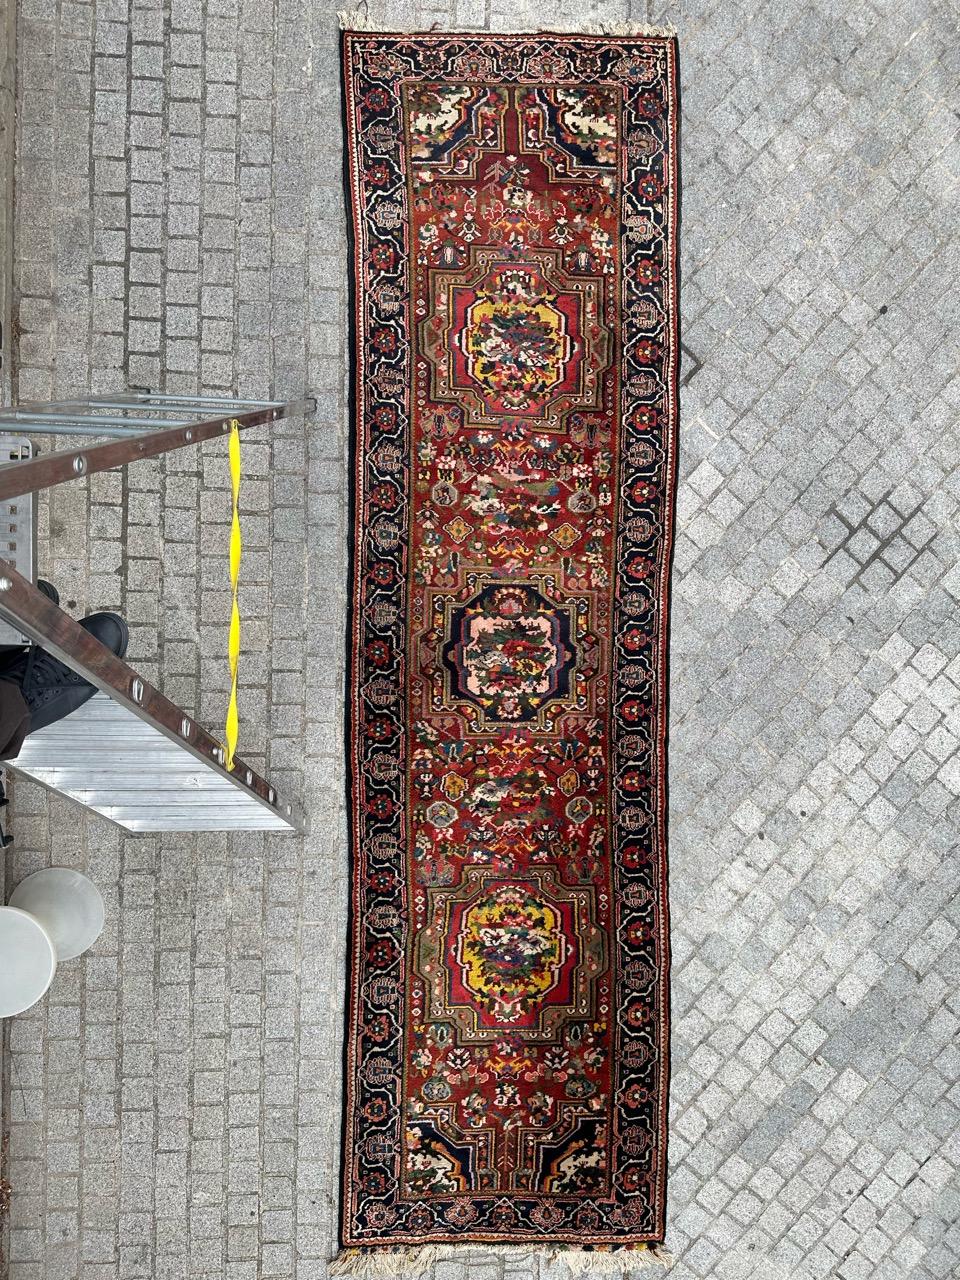 Stunning Mid Century Bakhtiar Rug with Exquisite Floral Design

Discover a true masterpiece in the style of French Savonnerie and Aubusson rugs. This mid-century Bakhtiar rug boasts captivating bright colors and intricate patterns. Hand-knotted with